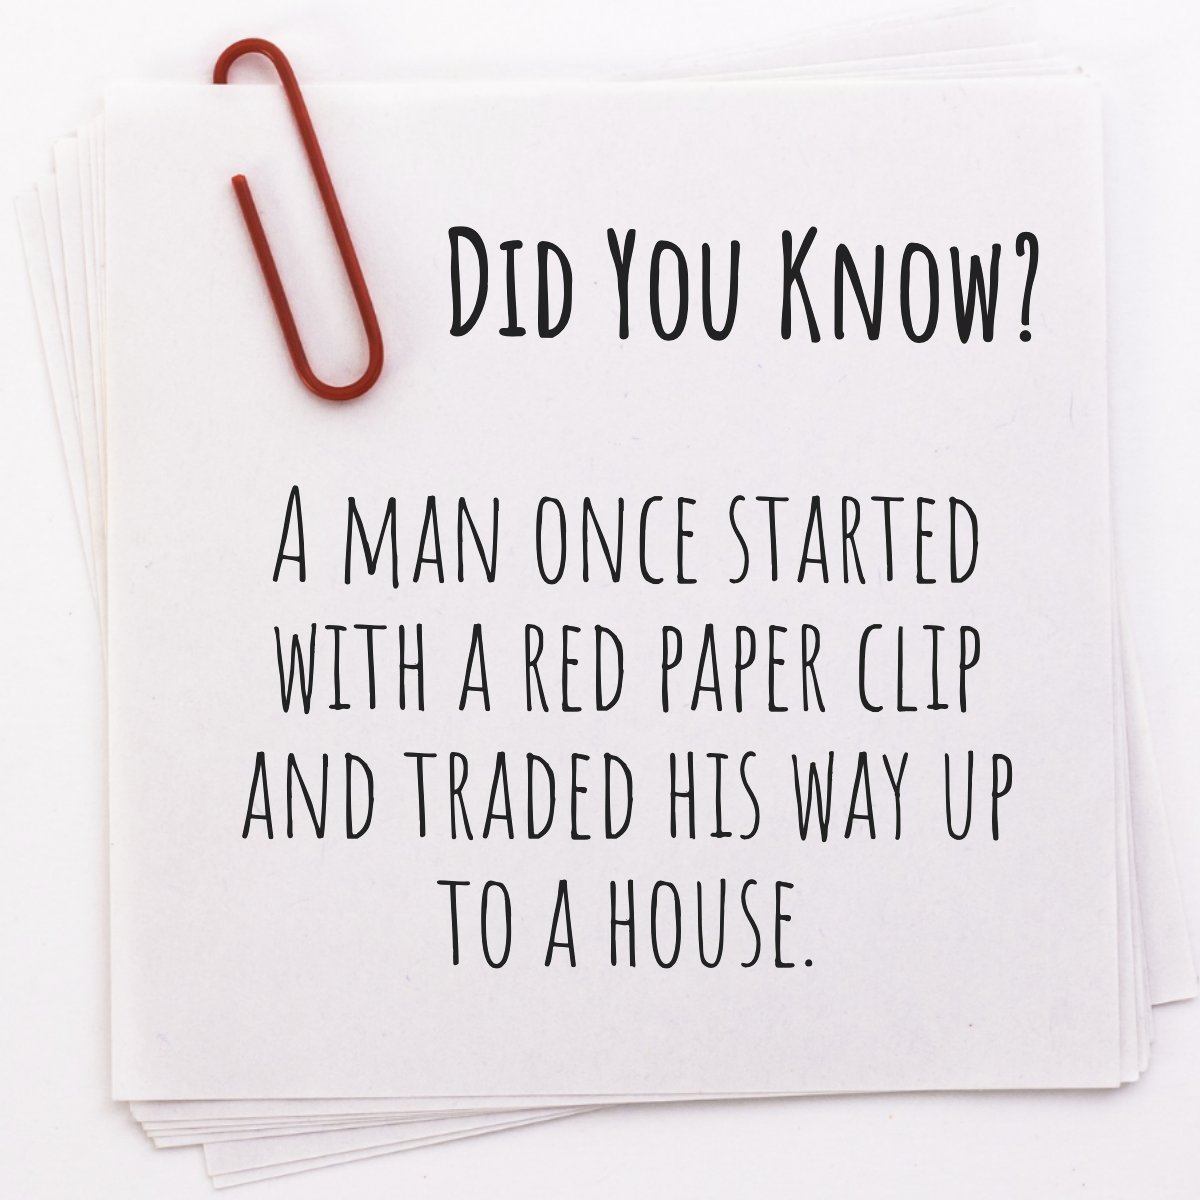 Did you know this? 😱 #didyouknowfacts #thisisforyou #diduknow #youknowwhatitis